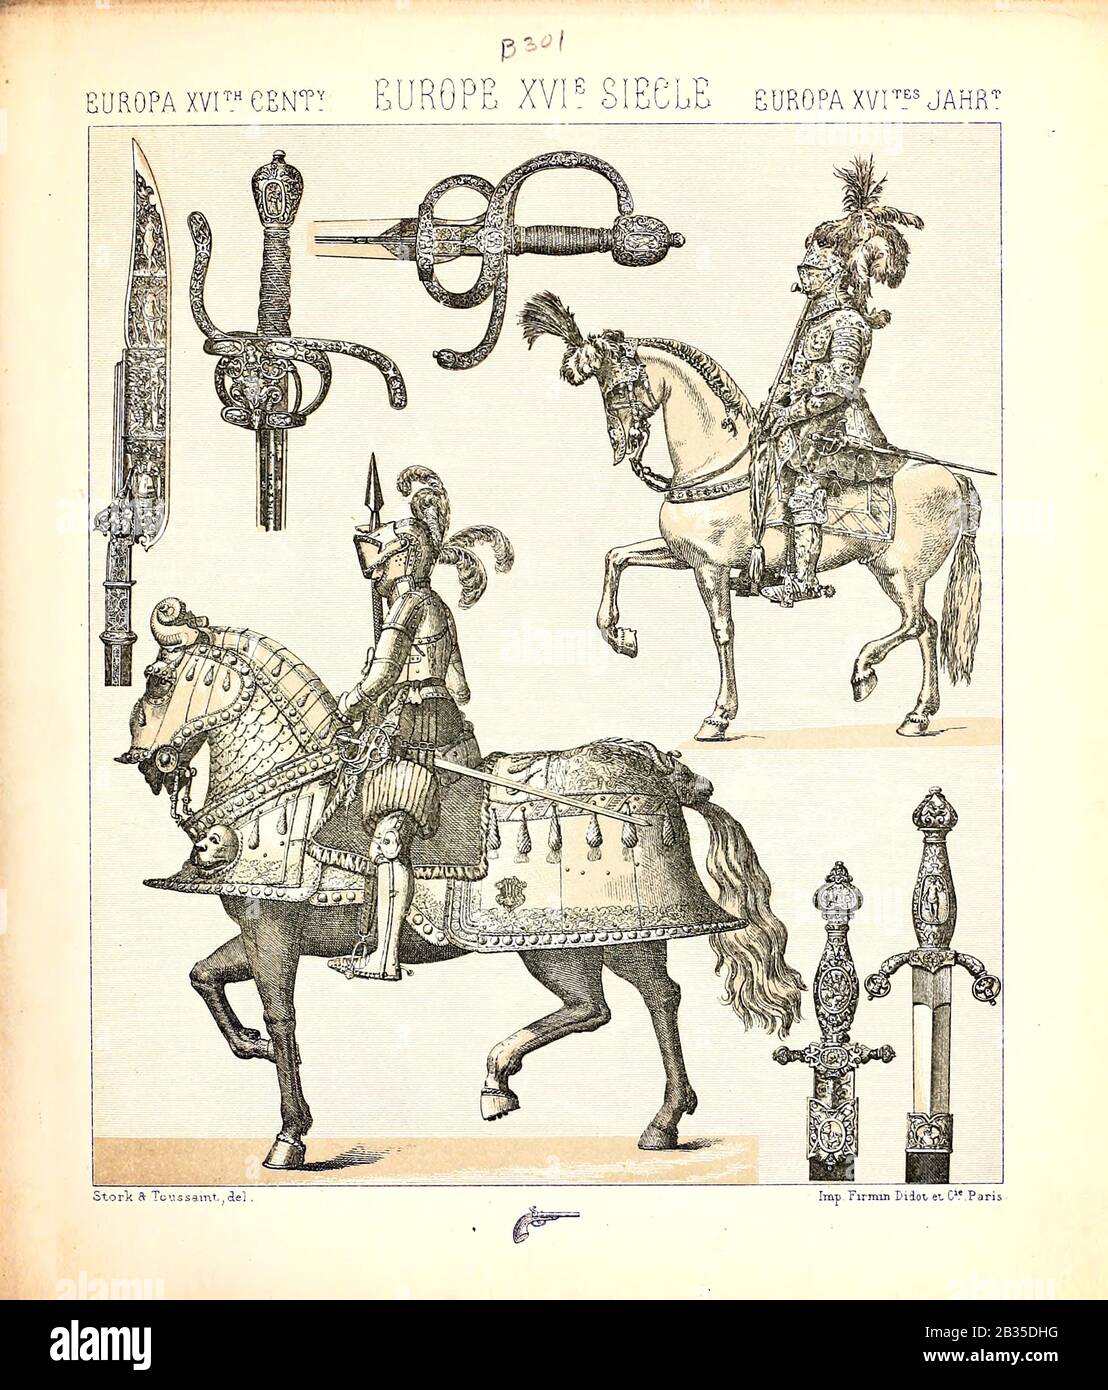 15th century knights and armour illustration from Geschichte des kostums in chronologischer entwicklung (History of the costume in chronological development) by Racinet, A. (Auguste), 1825-1893. and Rosenberg, Adolf, 1850-1906, Volume 3 printed in Berlin in 1888 Stock Photo